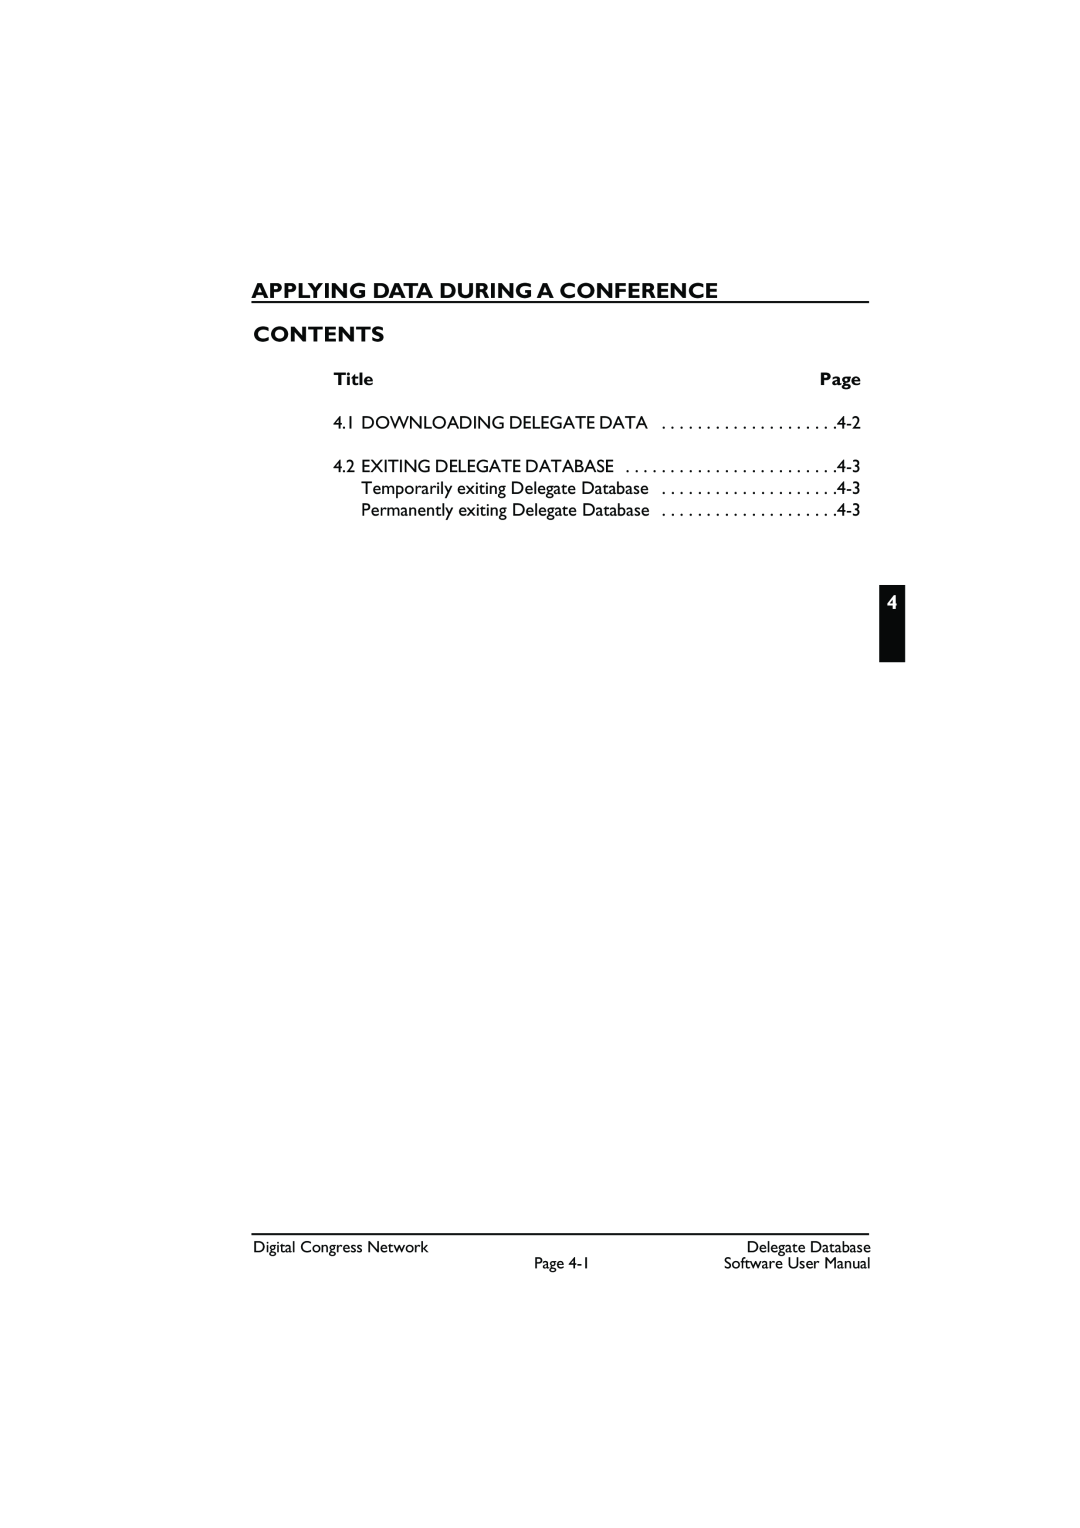 Bosch Appliances LBB3580 user manual Applying Data During A Conference Contents, Title, Page, Downloading Delegate Data 